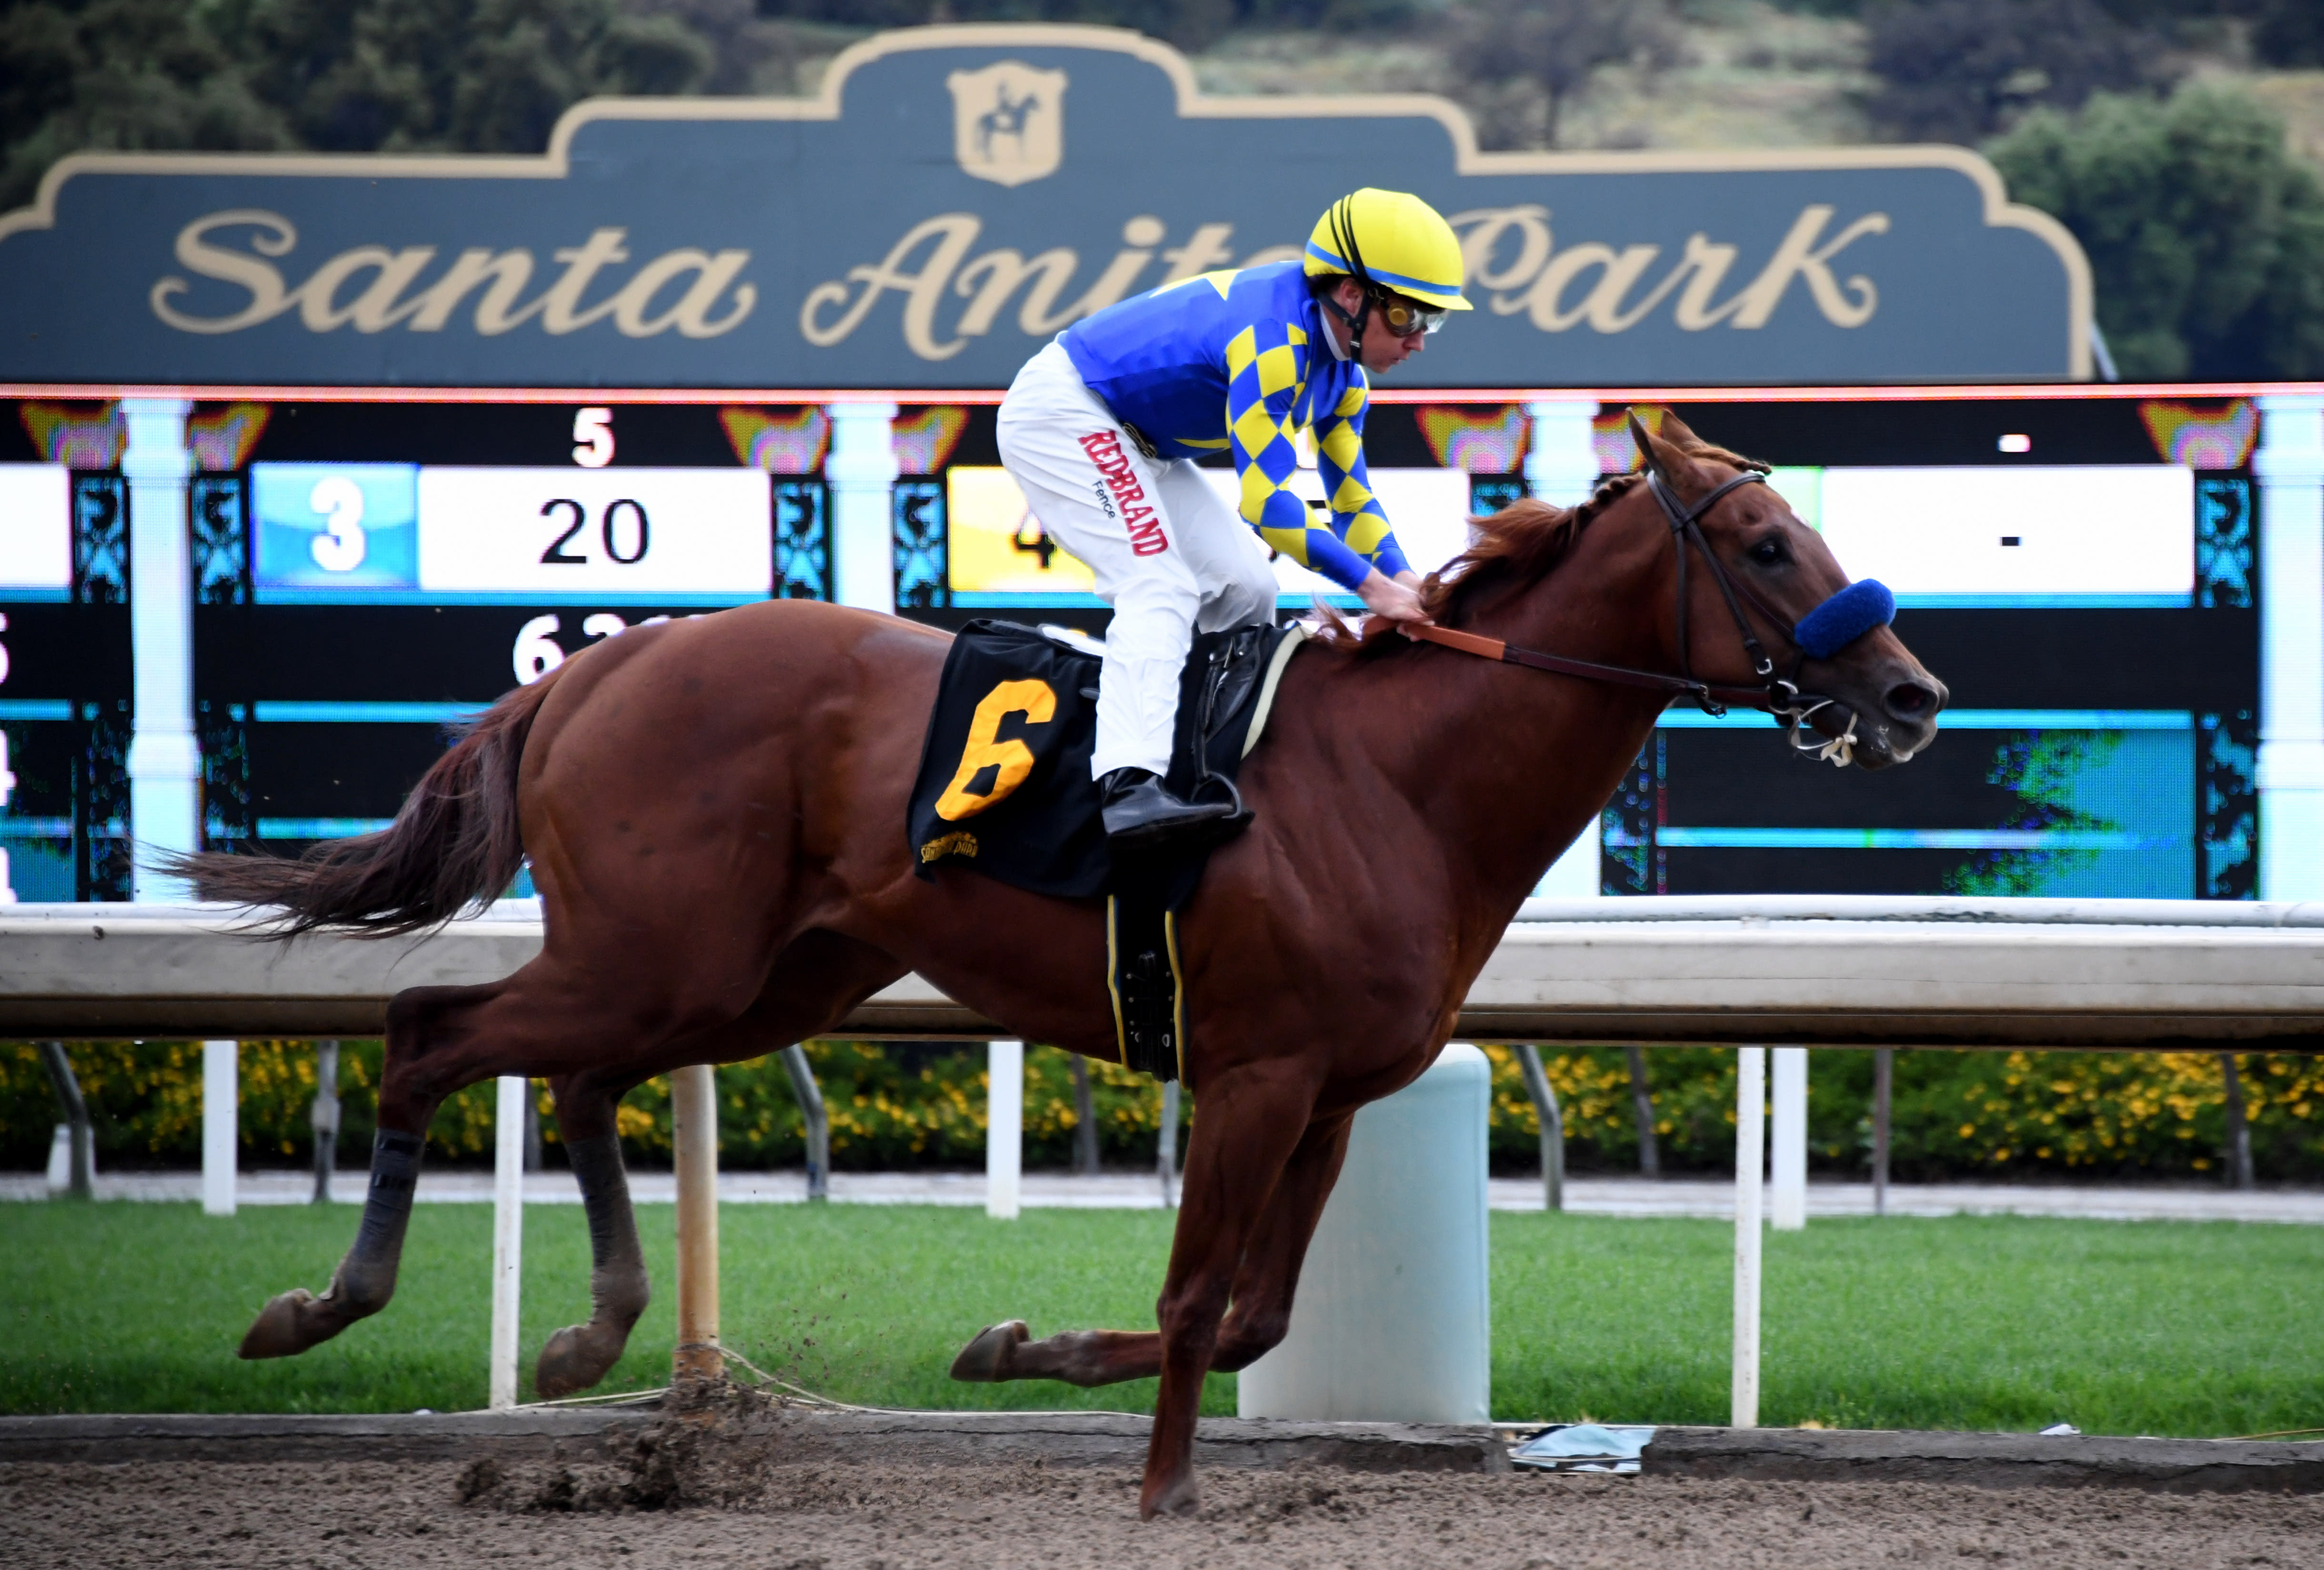 California horse racing board approves new rule restricting whip use